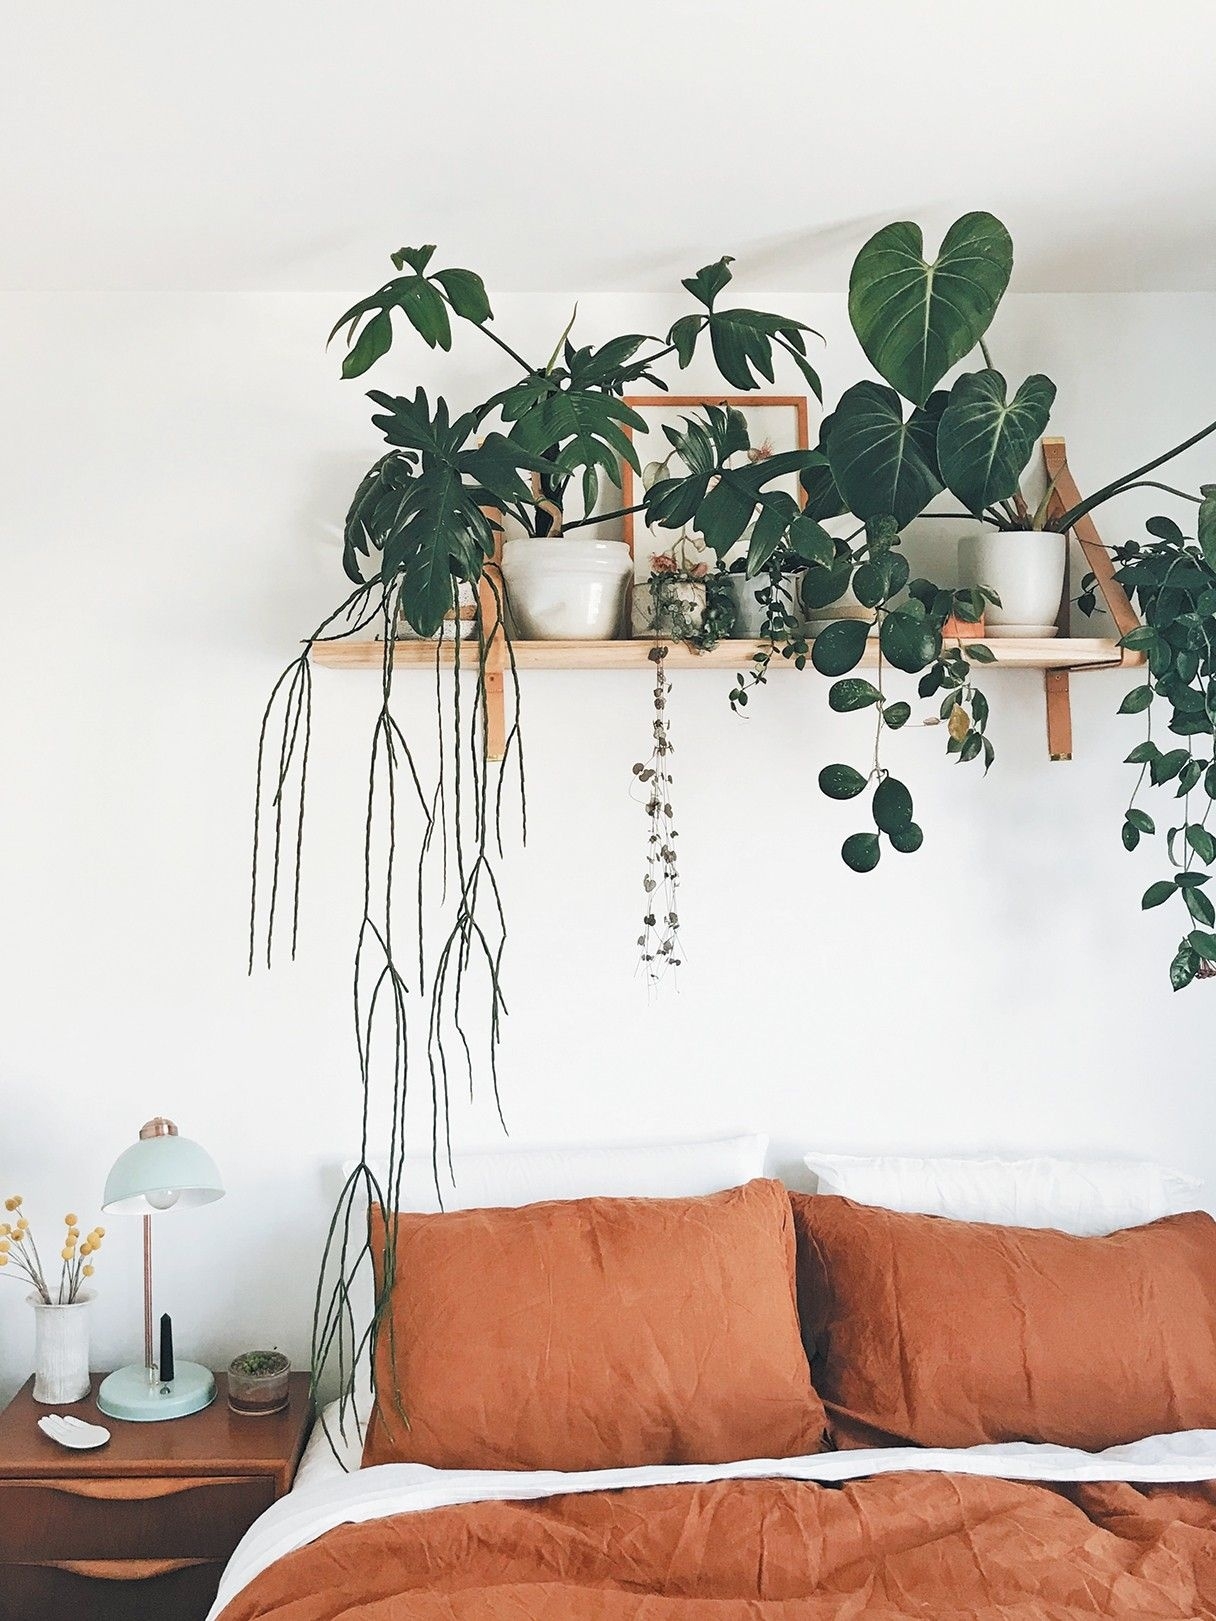 Sensational Good Plants To Have In Your Bedroom Image for How To Create A Plant Shelf That Doesn'T Get Dirt All Over Your Bedding